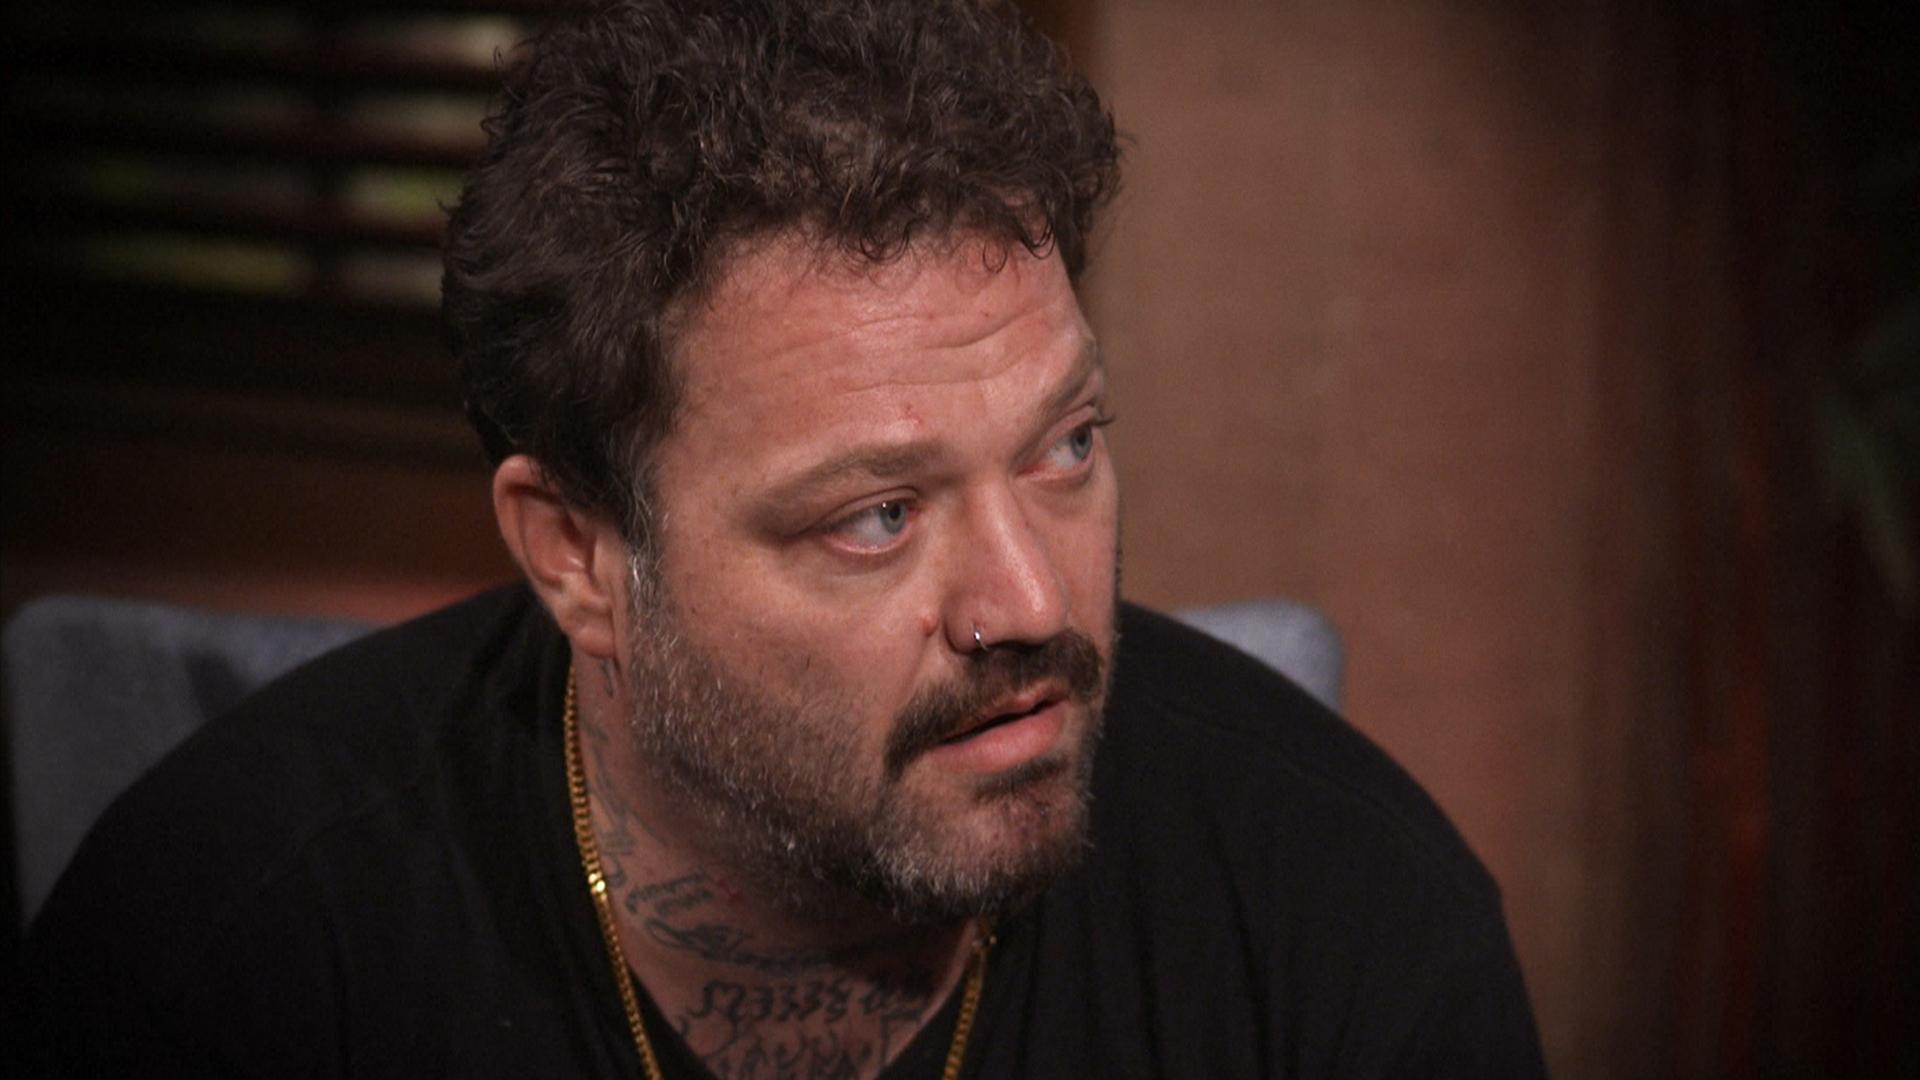 Bam Margera on Dr Phil